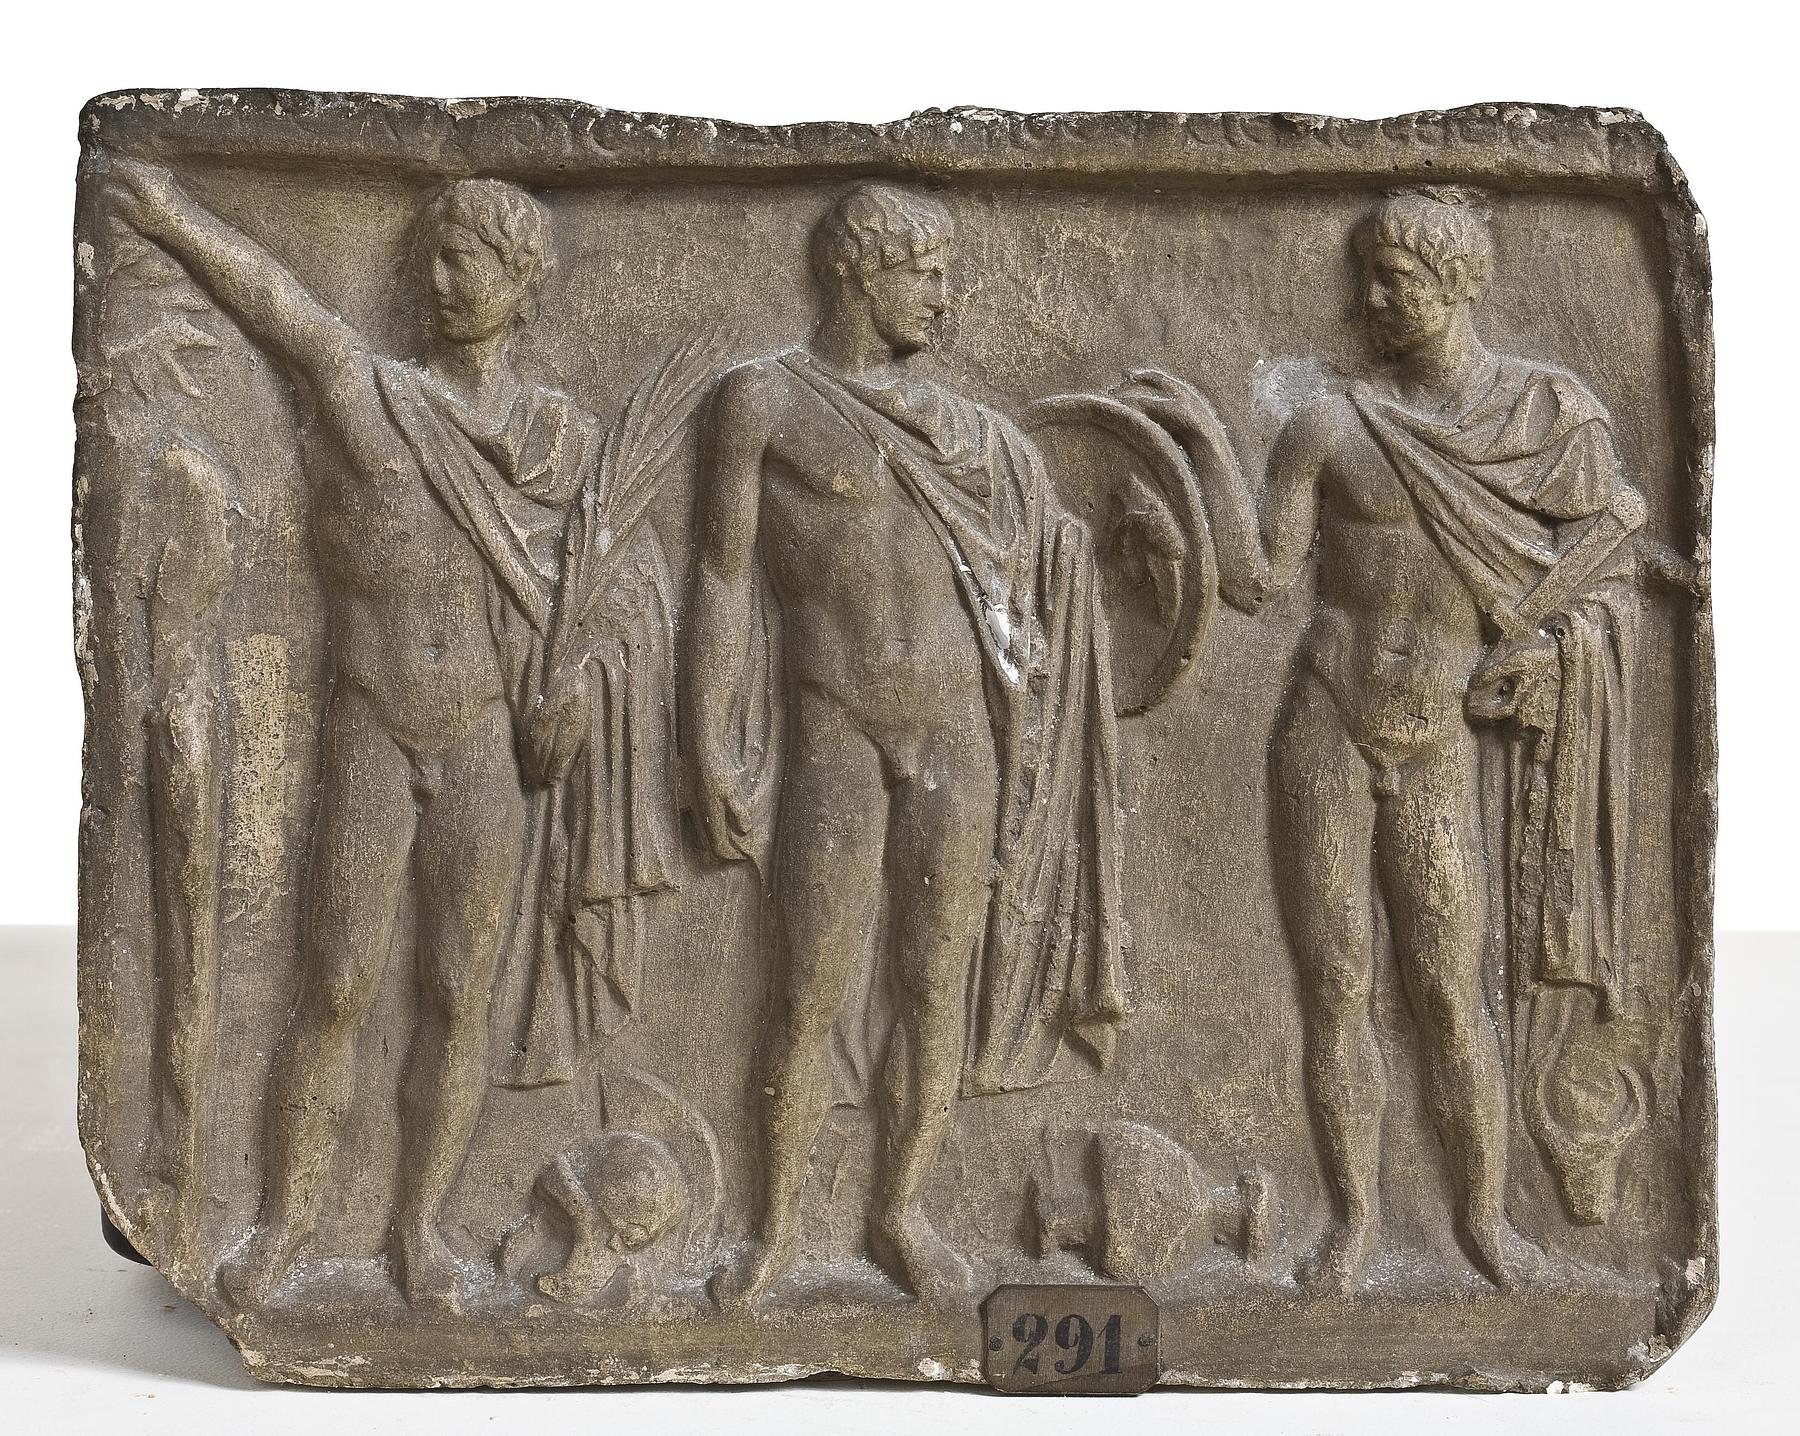 Three standing youths, L291